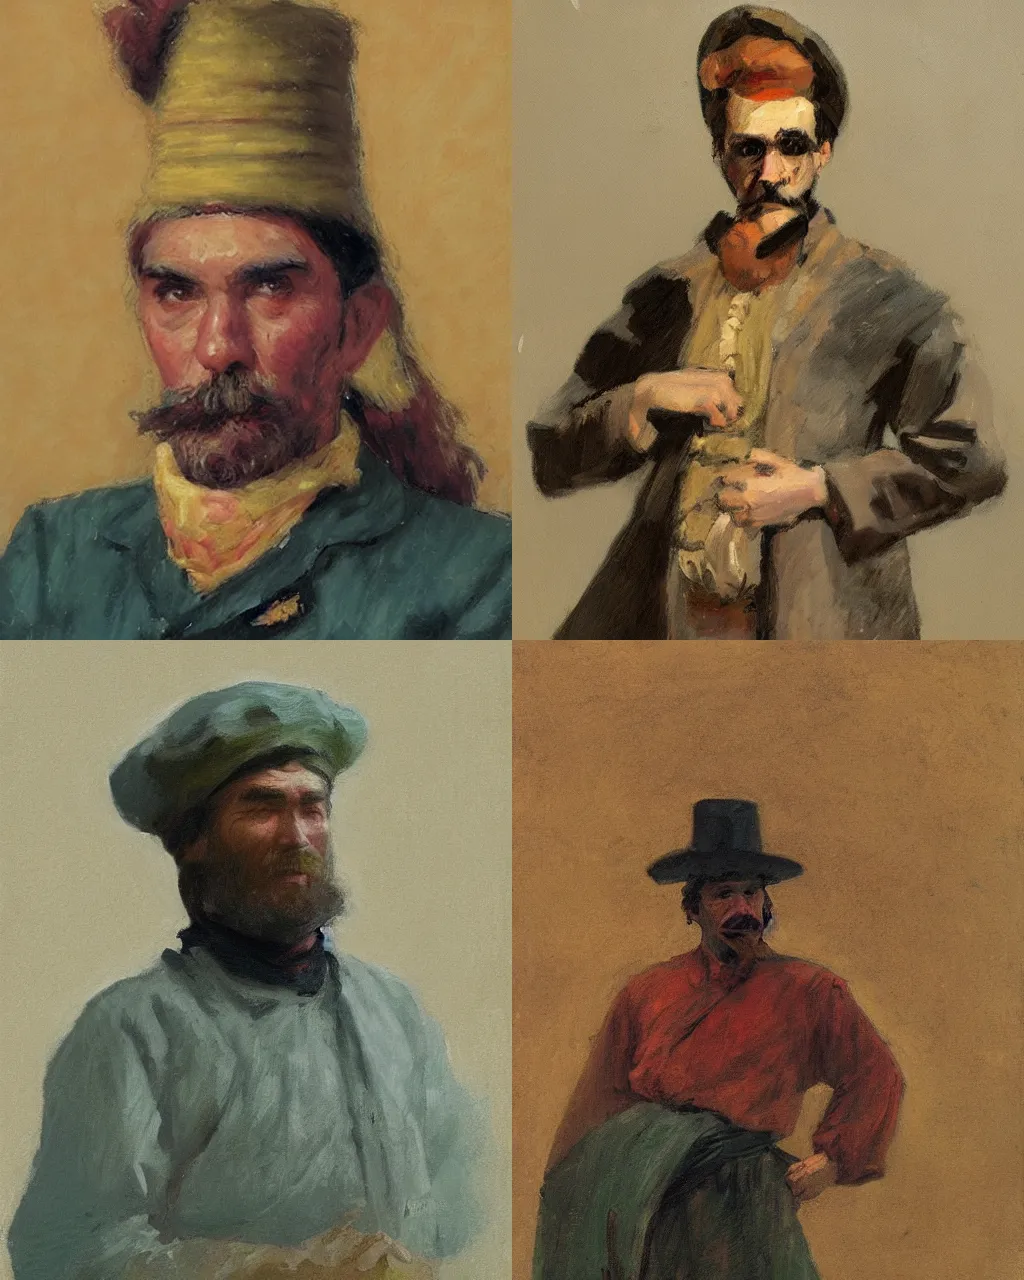 Prompt: Medium shot of a typical character in the style of Ilya Repin